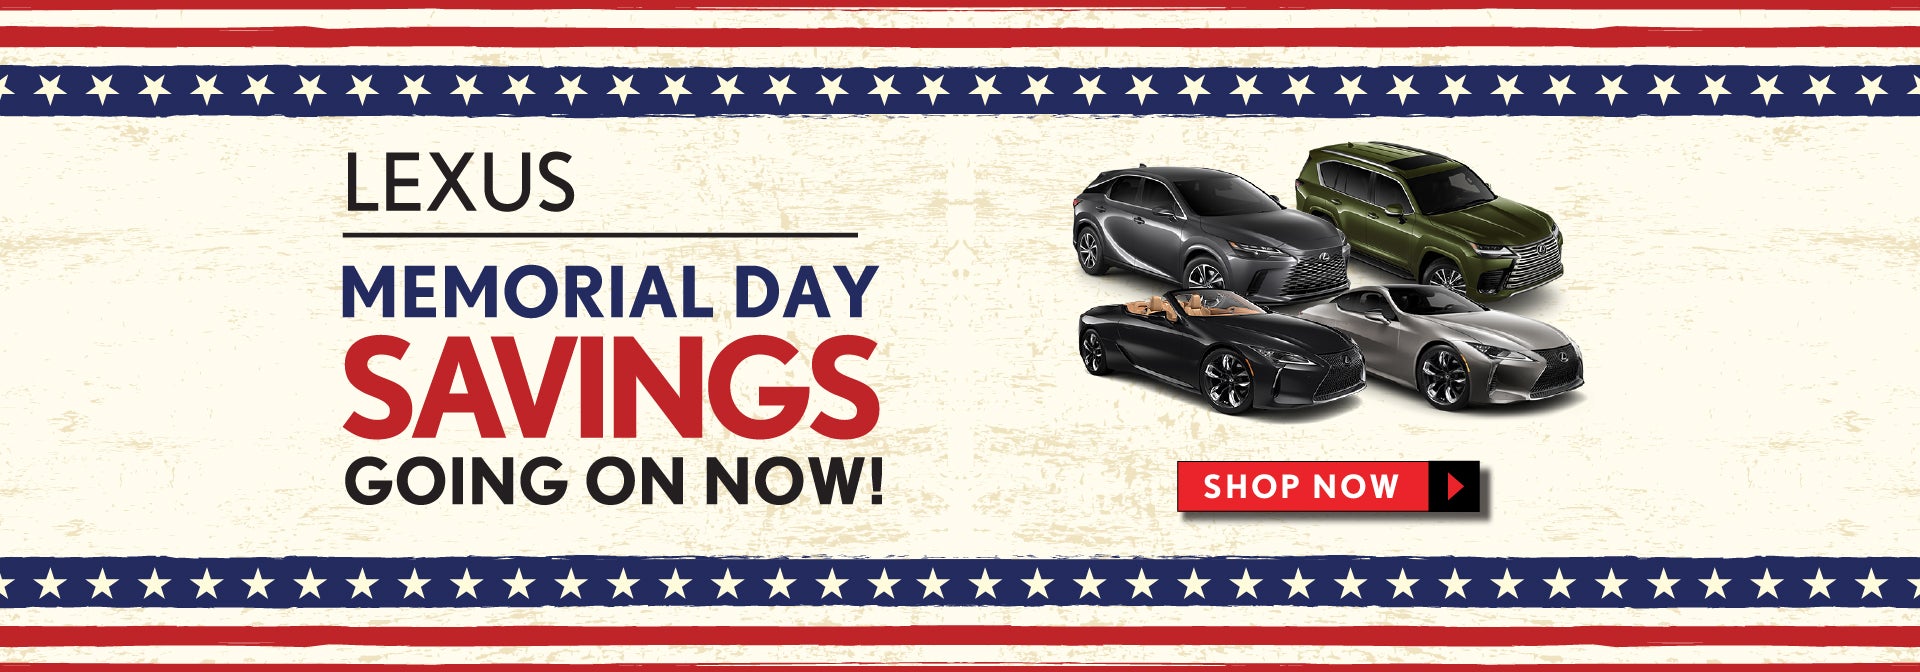 Memorial Day Savings Going on Now